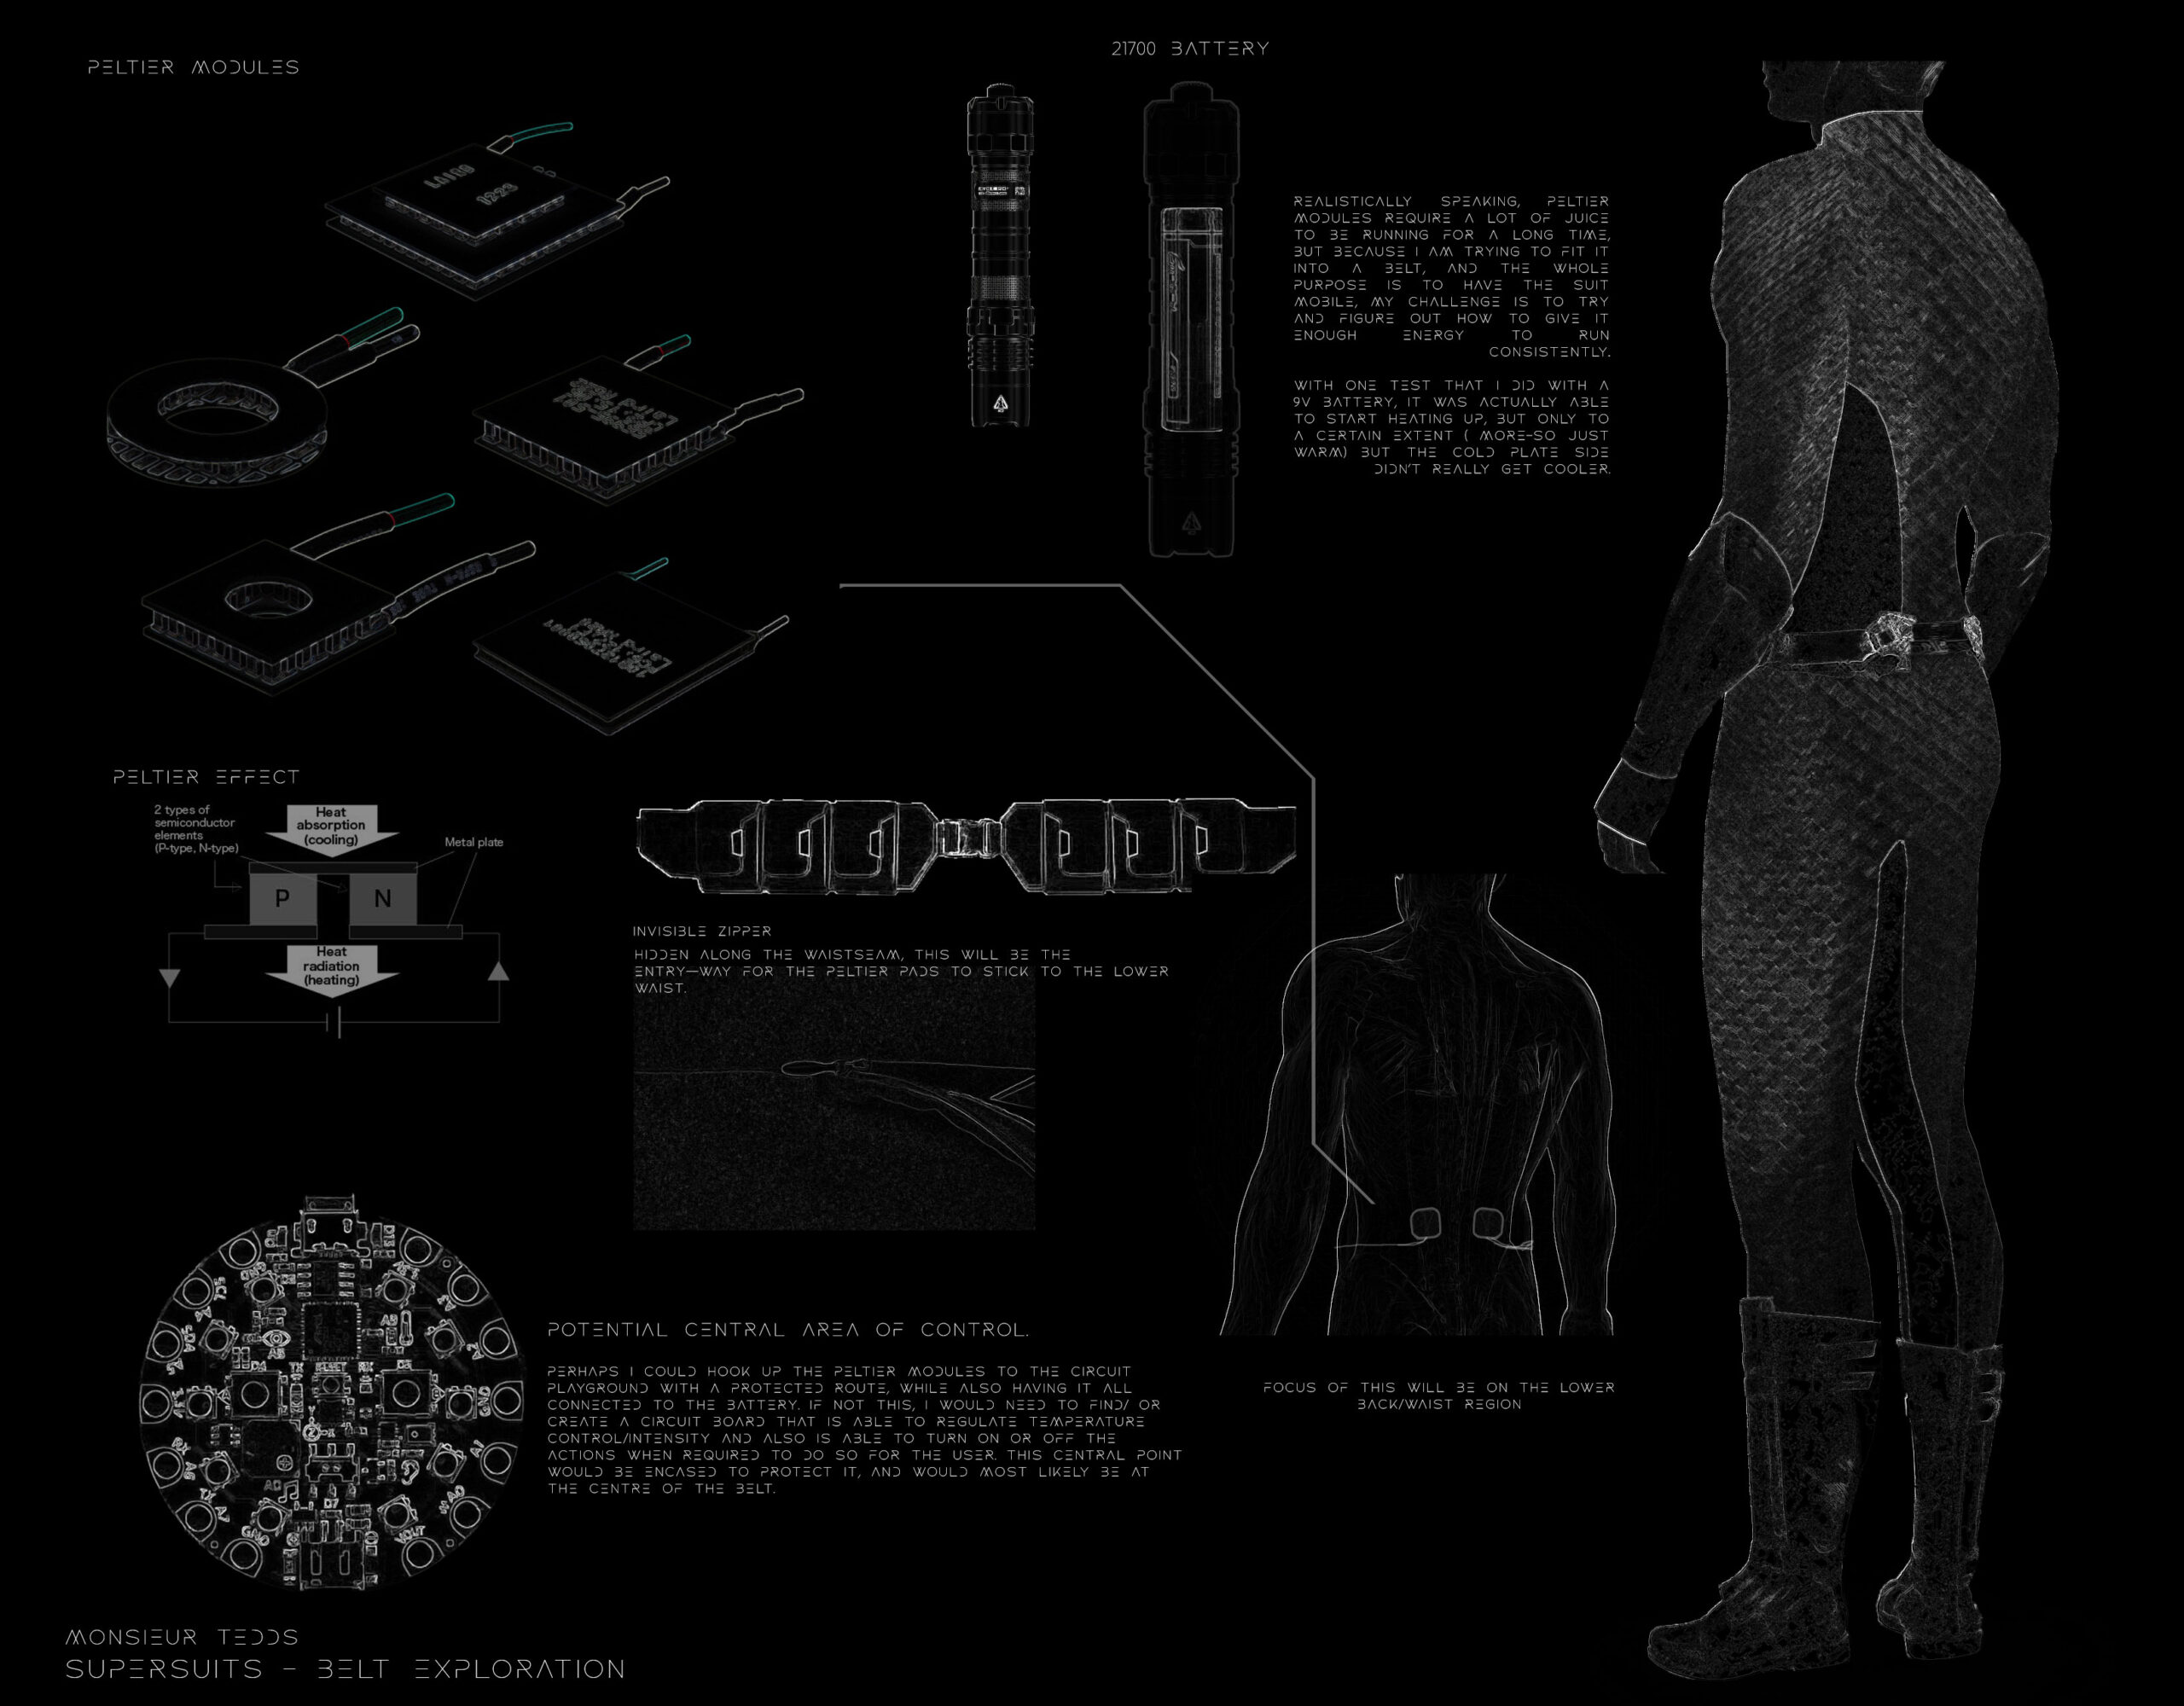 With the goal of trying to integrate tech into this suit, the objective is to try and answer a design challenge. This is an exploration of how the belt and its functionalities could possibly work. The key component that I am interested in studying is the Peltier module as the feature of it heating up and cooling down caught my attention as something that could potentially be innovative. The idea is having therapy pads that would attach to the region of the lower waist/ back region and be utilized for acute pains (heat therapy) and muscle pain (cold therapy).